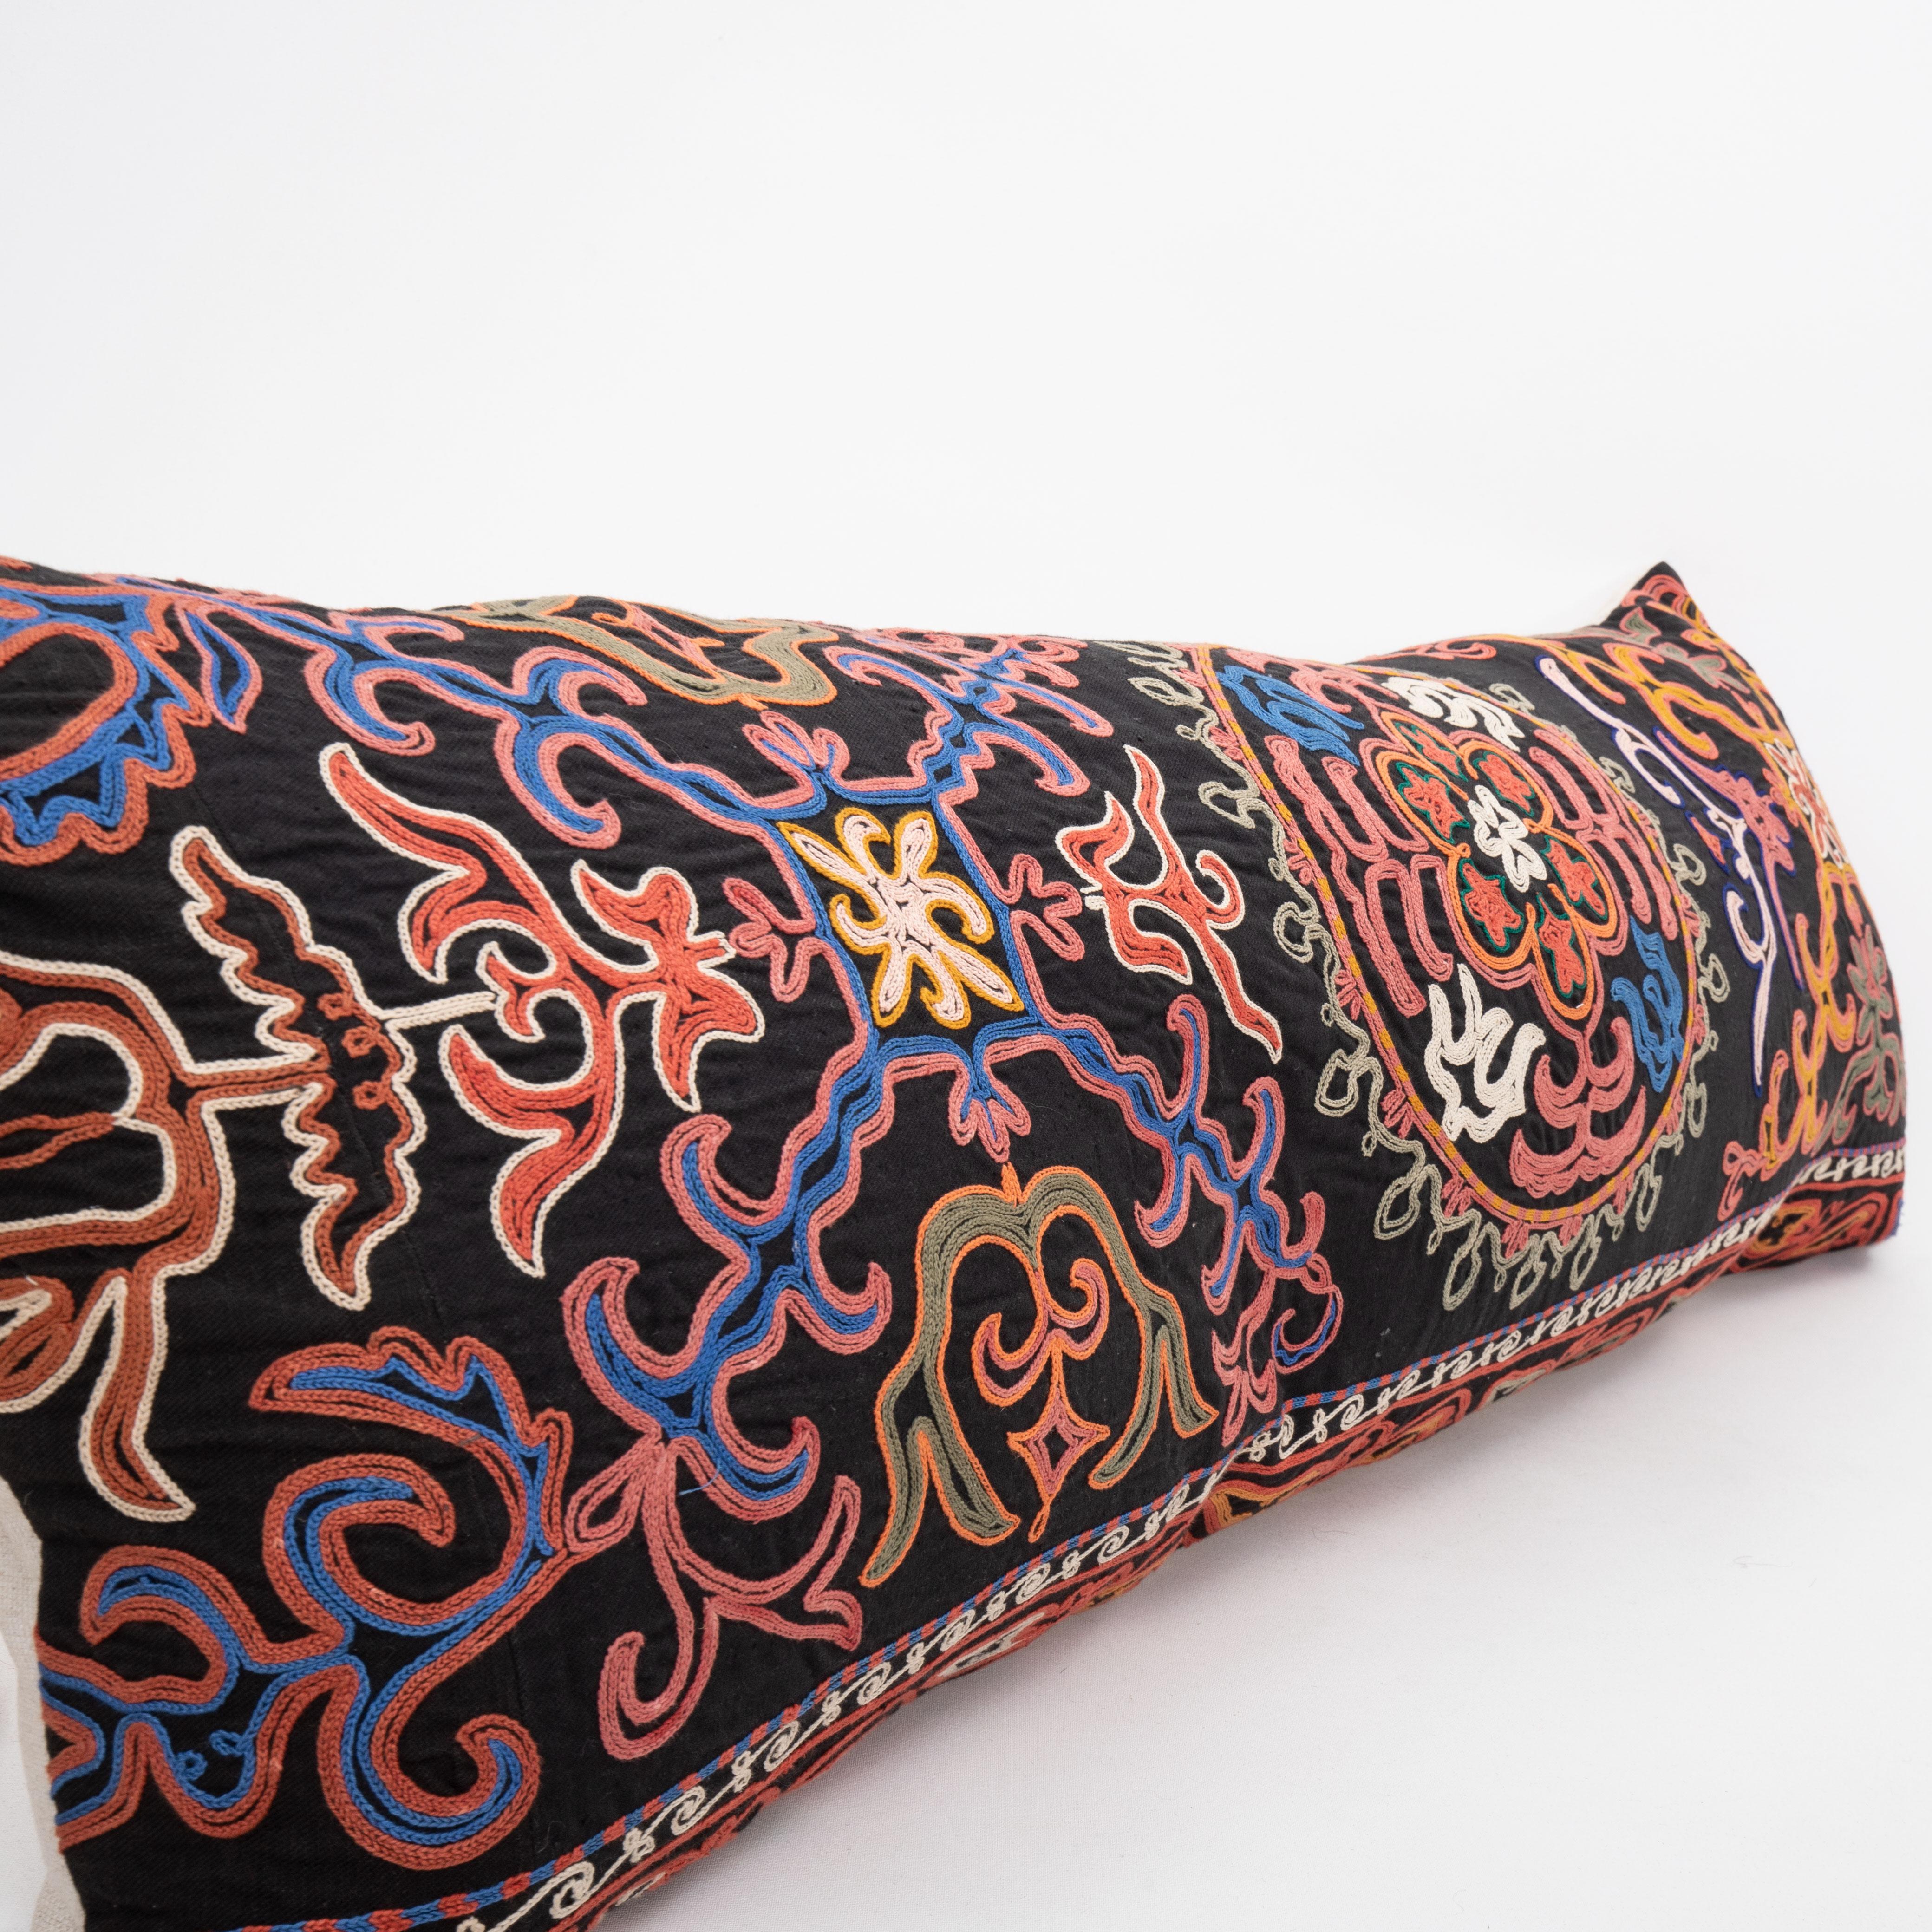 Embroidered Pillowcase made from a mid 20th. C. Kazakh / Kyrgyz Embroidery For Sale